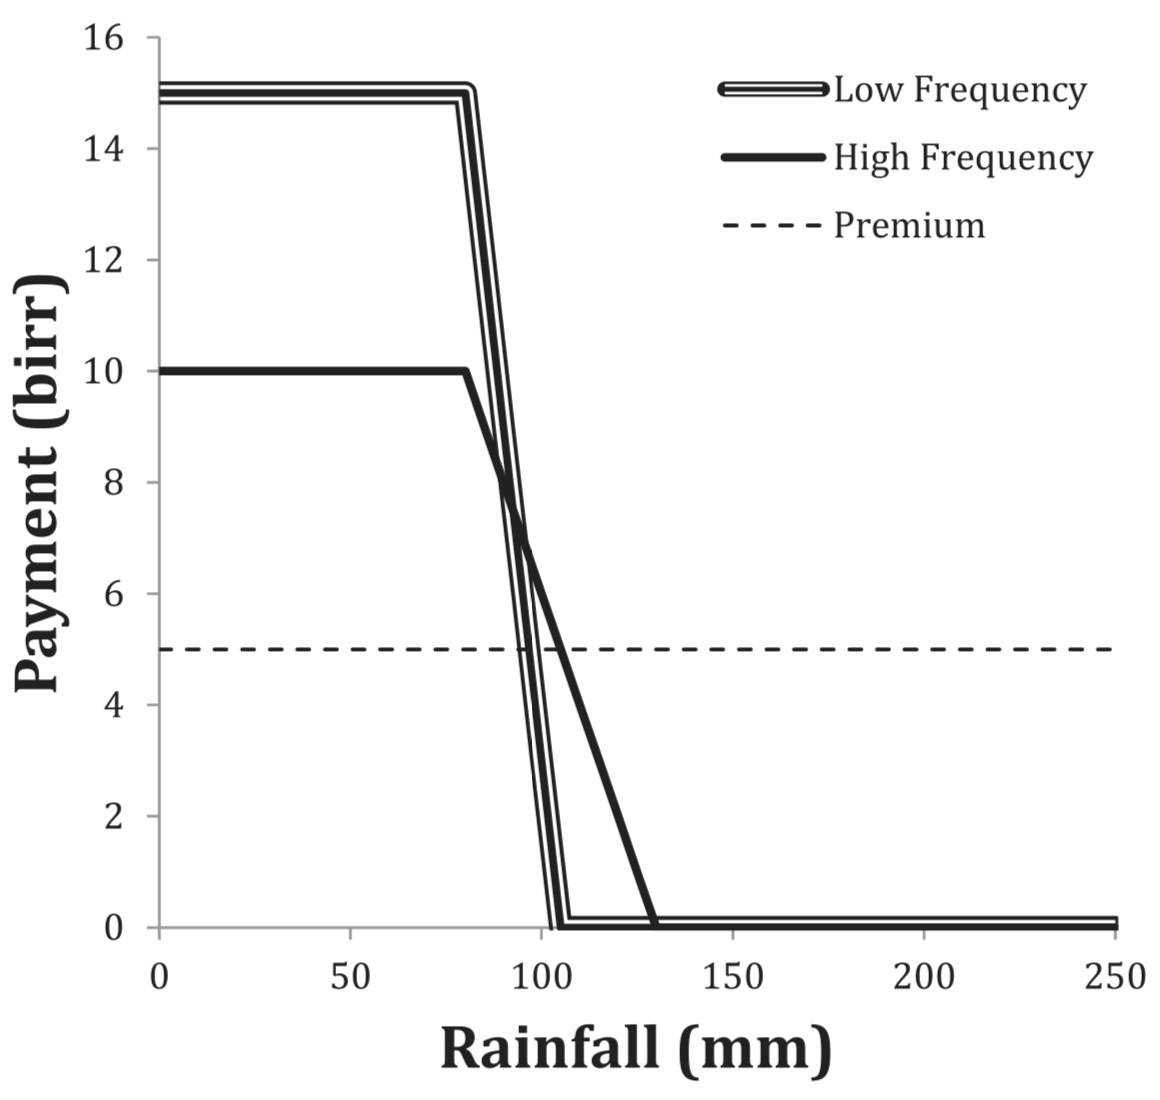 Payout as function of rainfall